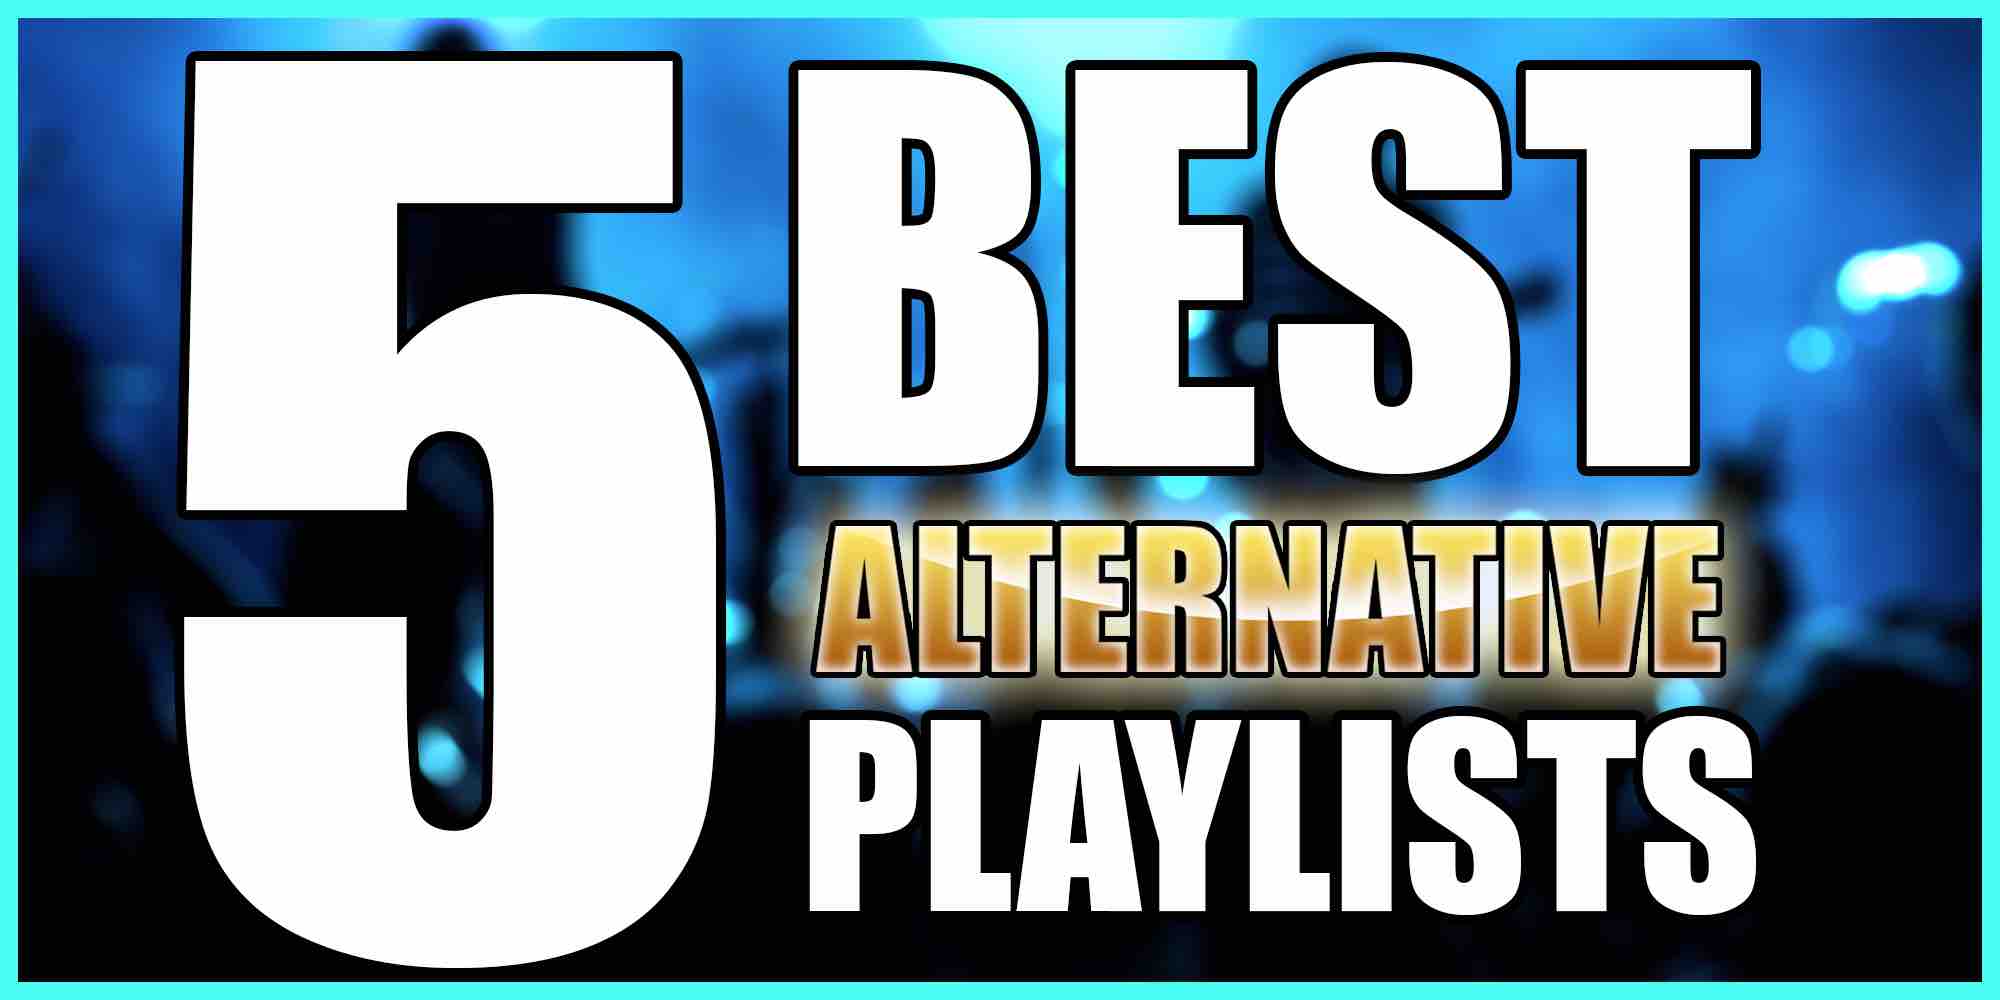 Playlist: Best of May - The Alternative